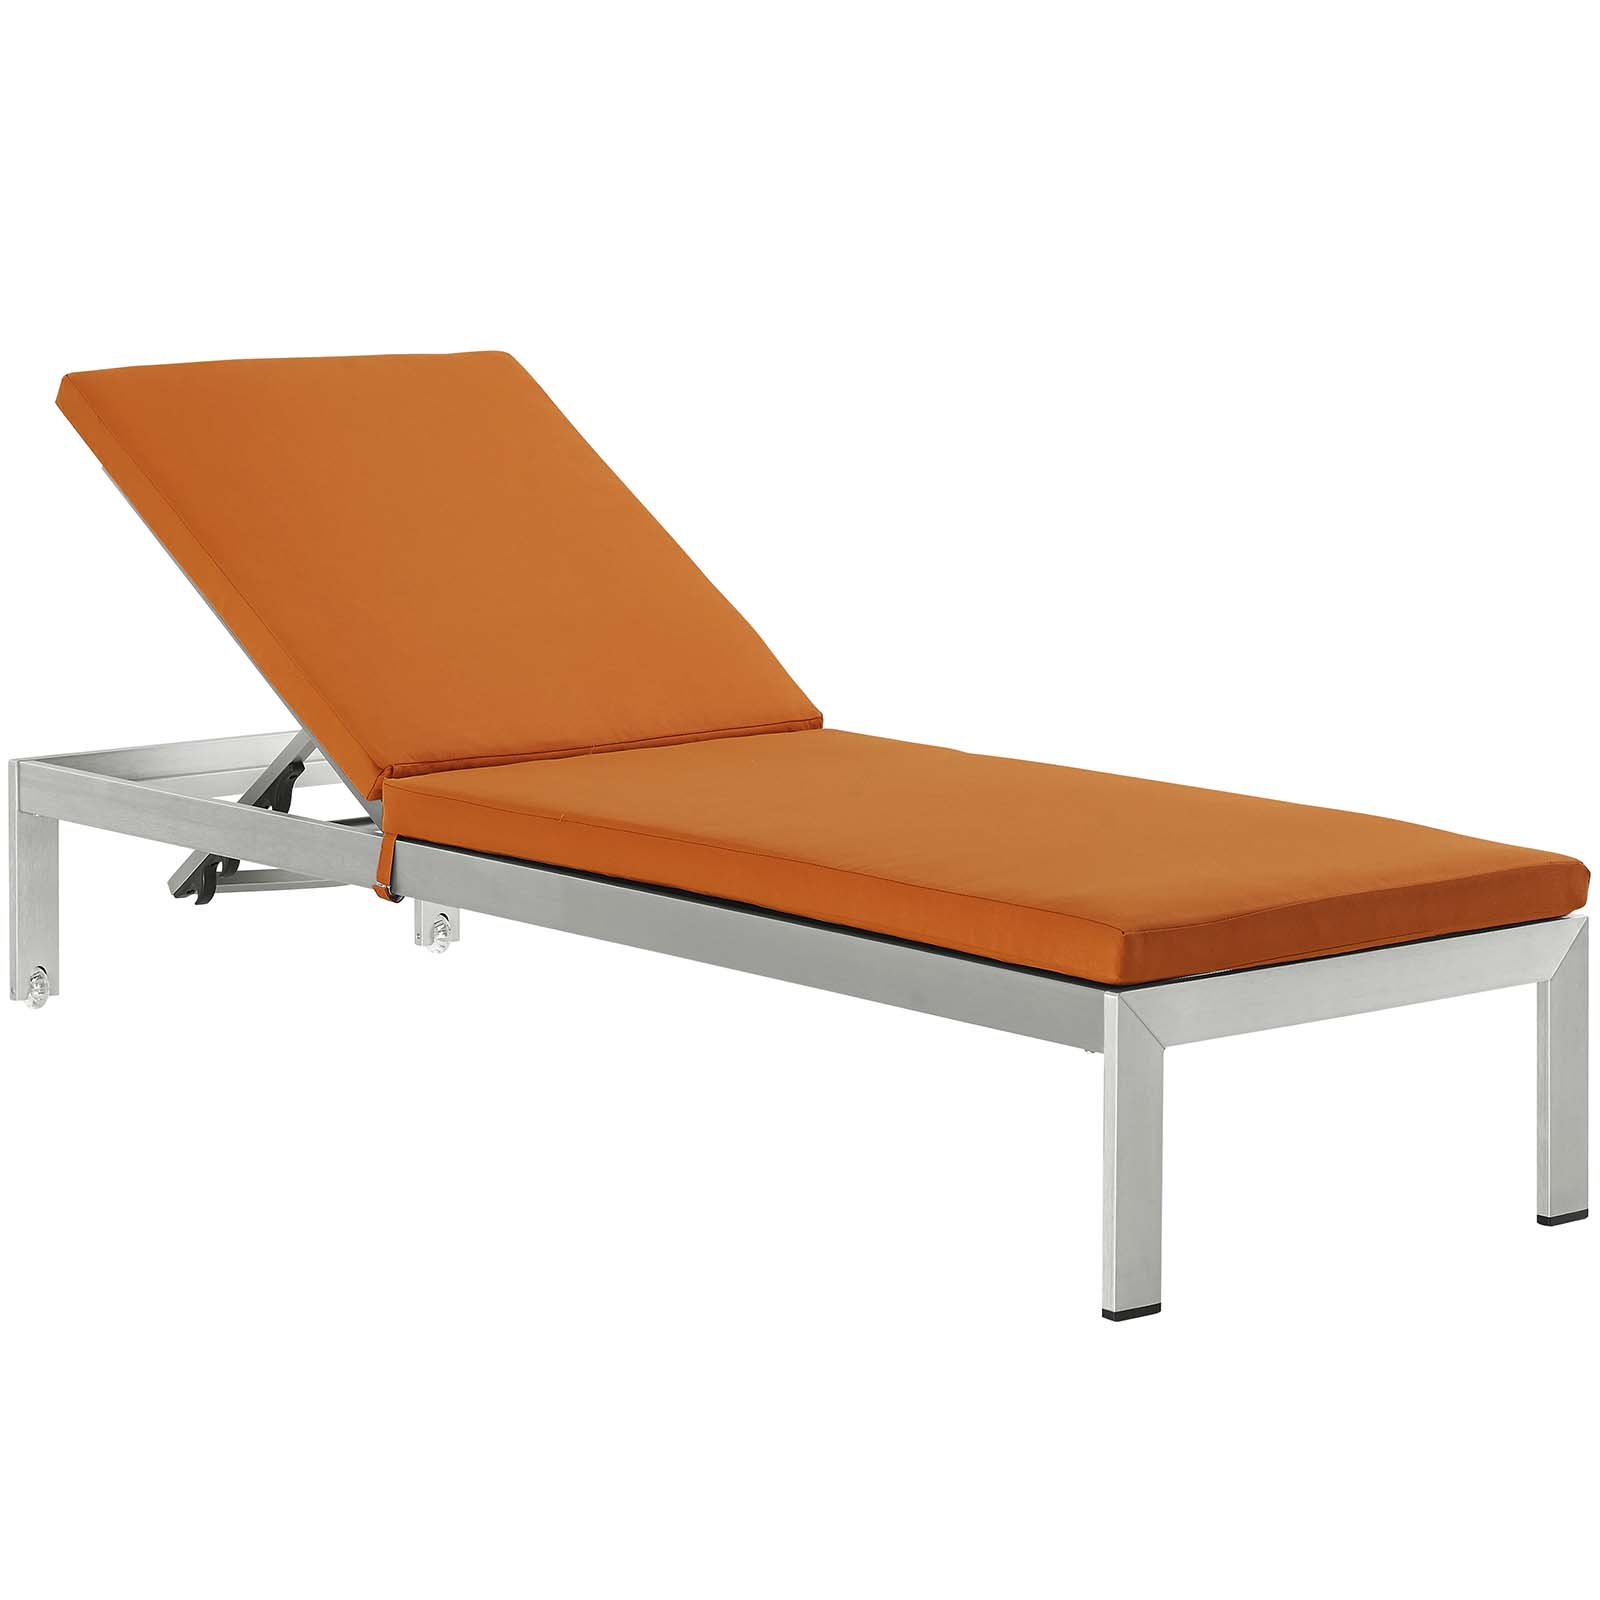 Modern Contemporary Urban Design Outdoor Patio Balcony Chaise Lounge Chair ( Set of 4), Orange, Aluminum - image 3 of 6